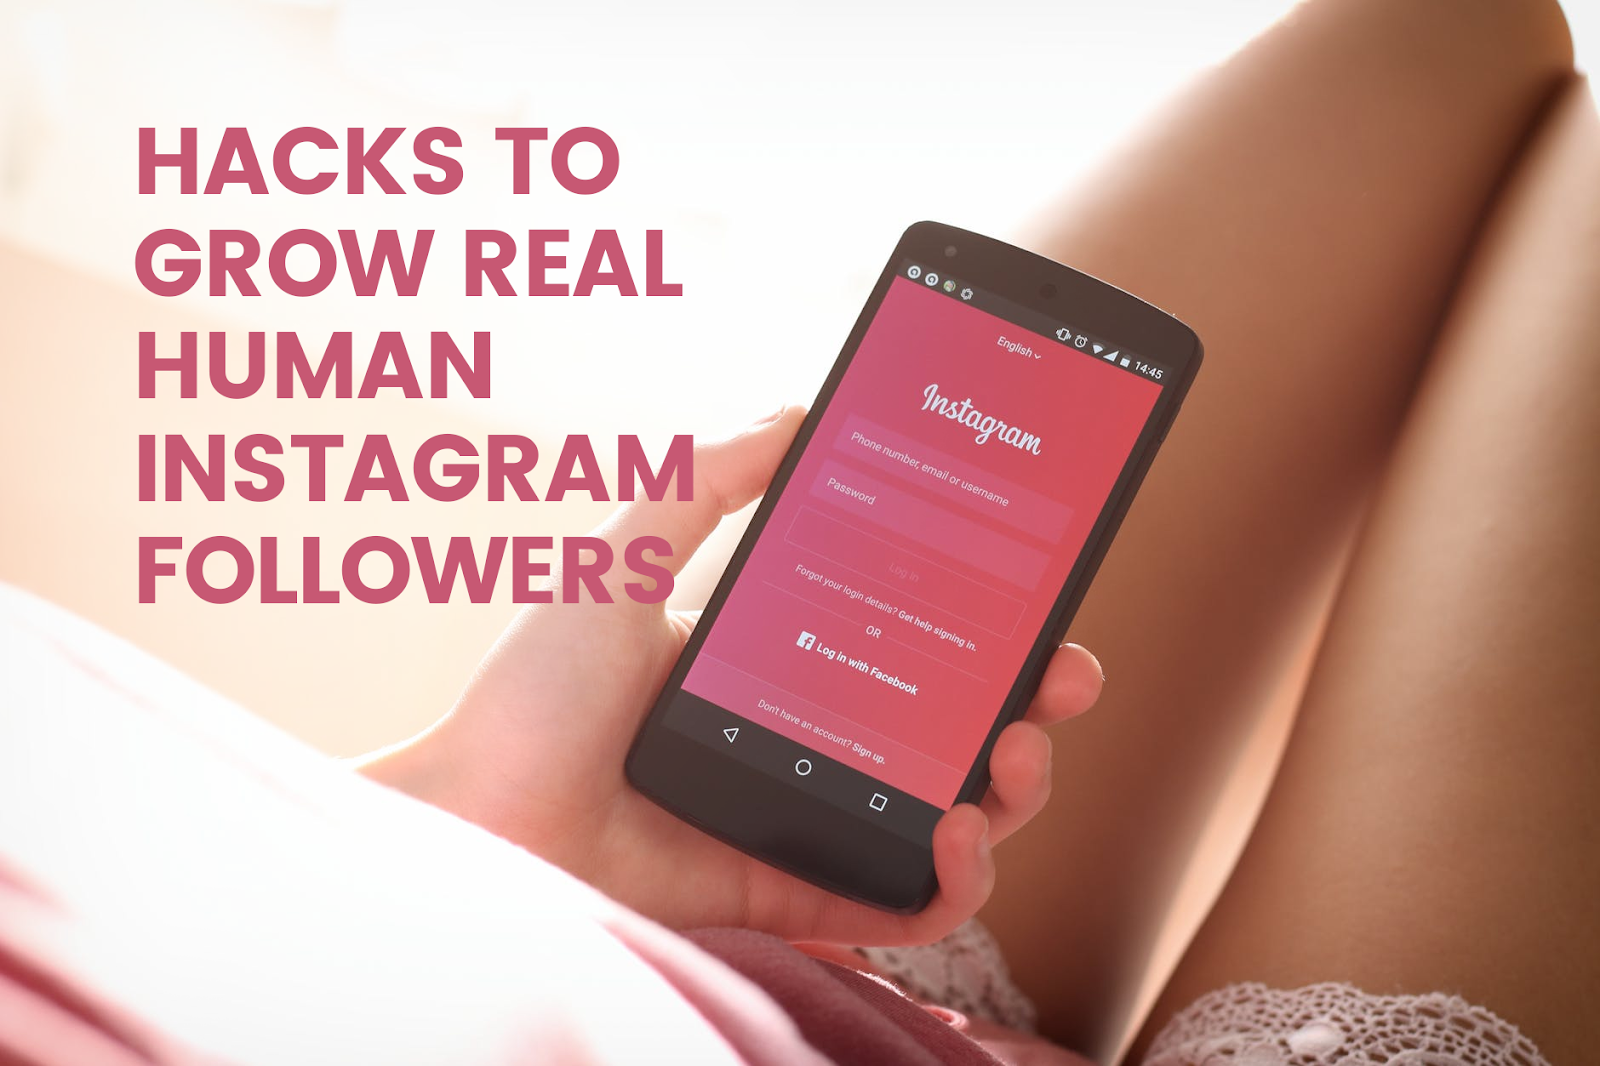 How to Get More Followers on Instagram (Without Buying Them) - CXL